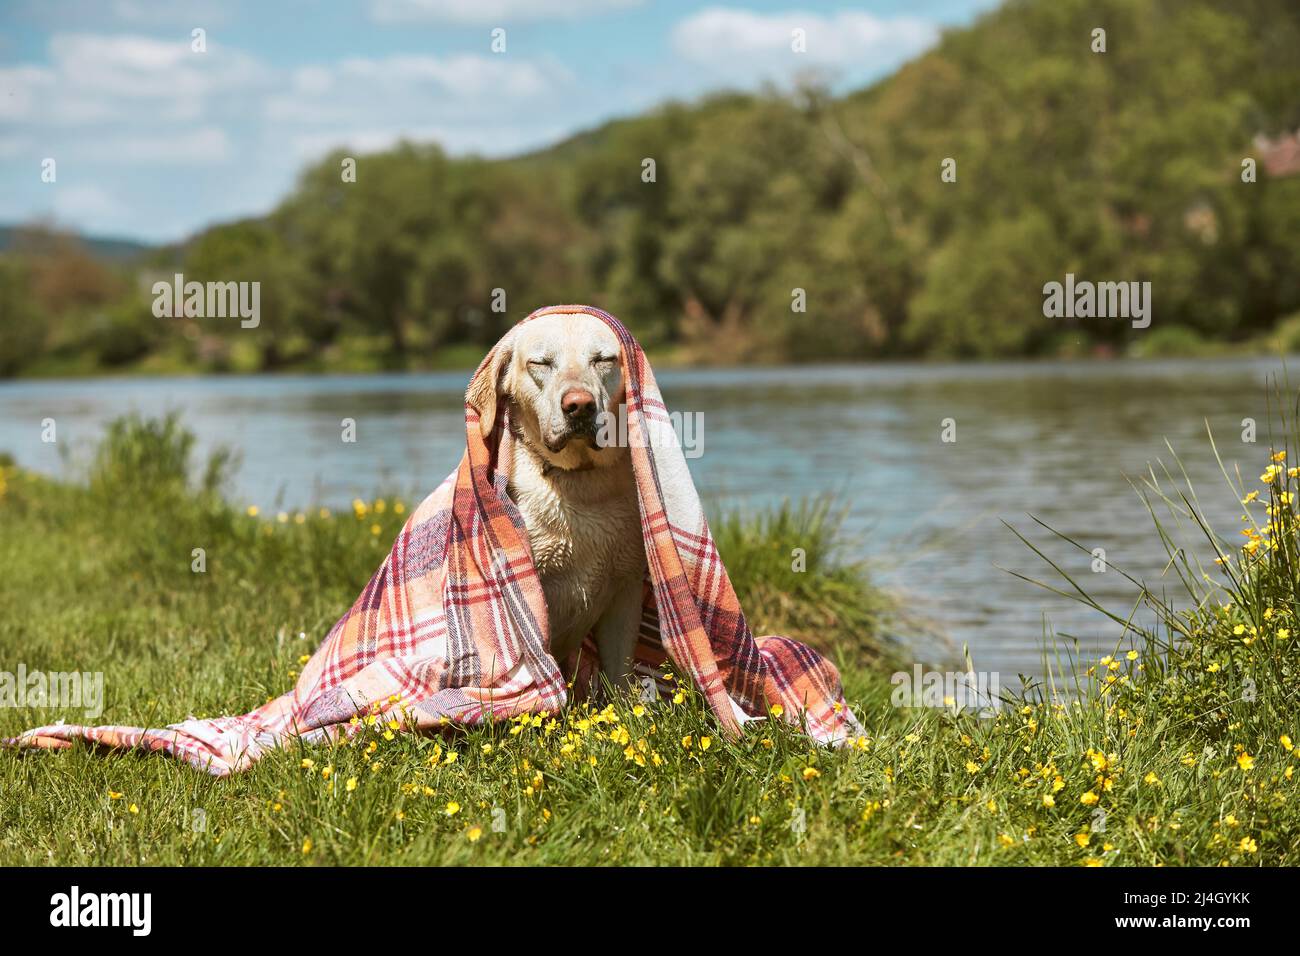 Funny portrait of dog on riverside. Wet labrador retriver covered in blanket sitting on meadow in sunny spring day. Stock Photo